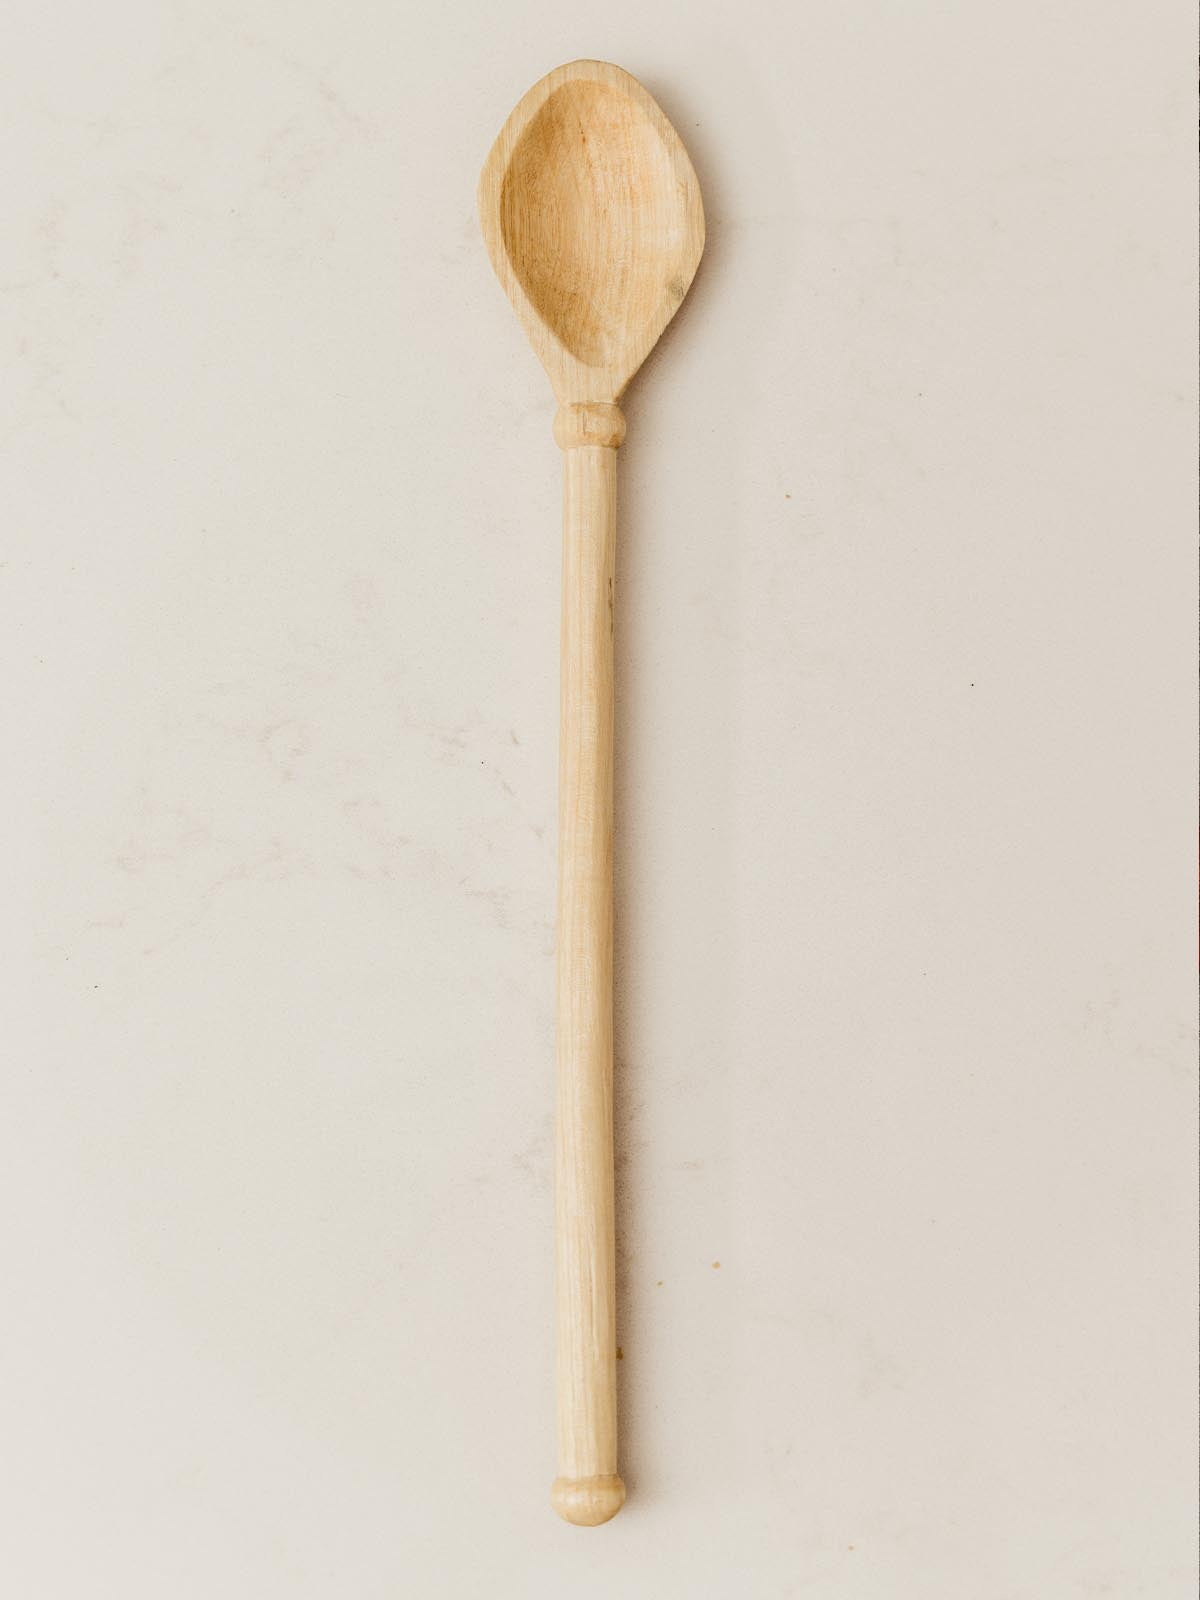 Small wooden spoon on table